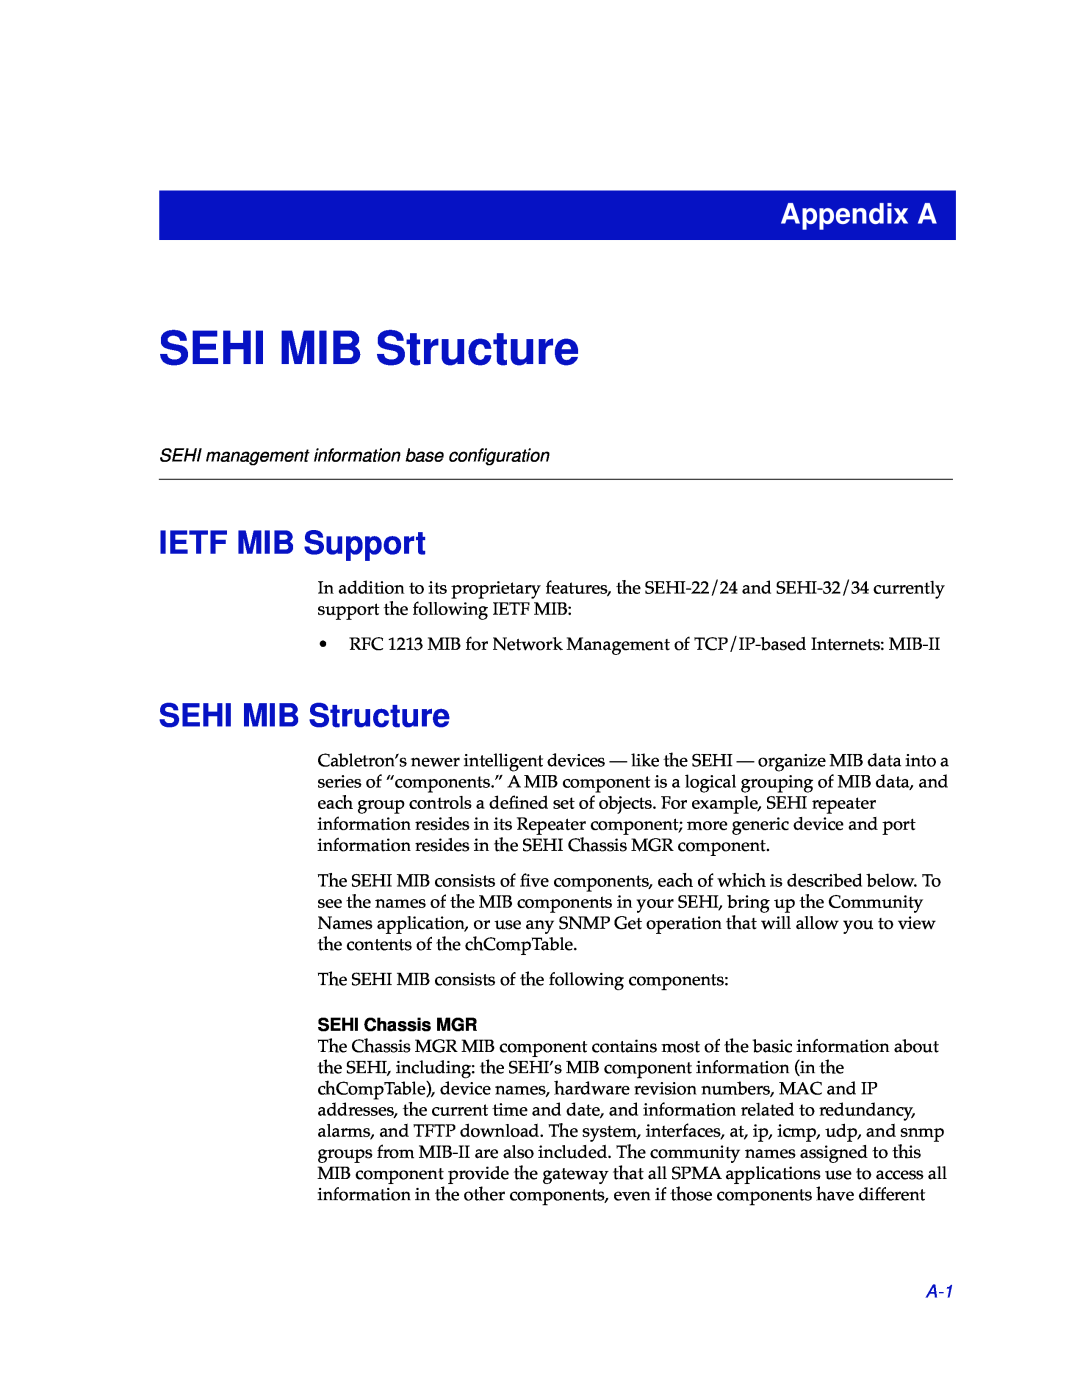 Cabletron Systems SEHI-22/24, SEHI-32/34 manual SEHI MIB Structure, IETF MIB Support, Appendix A, SEHI Chassis MGR 